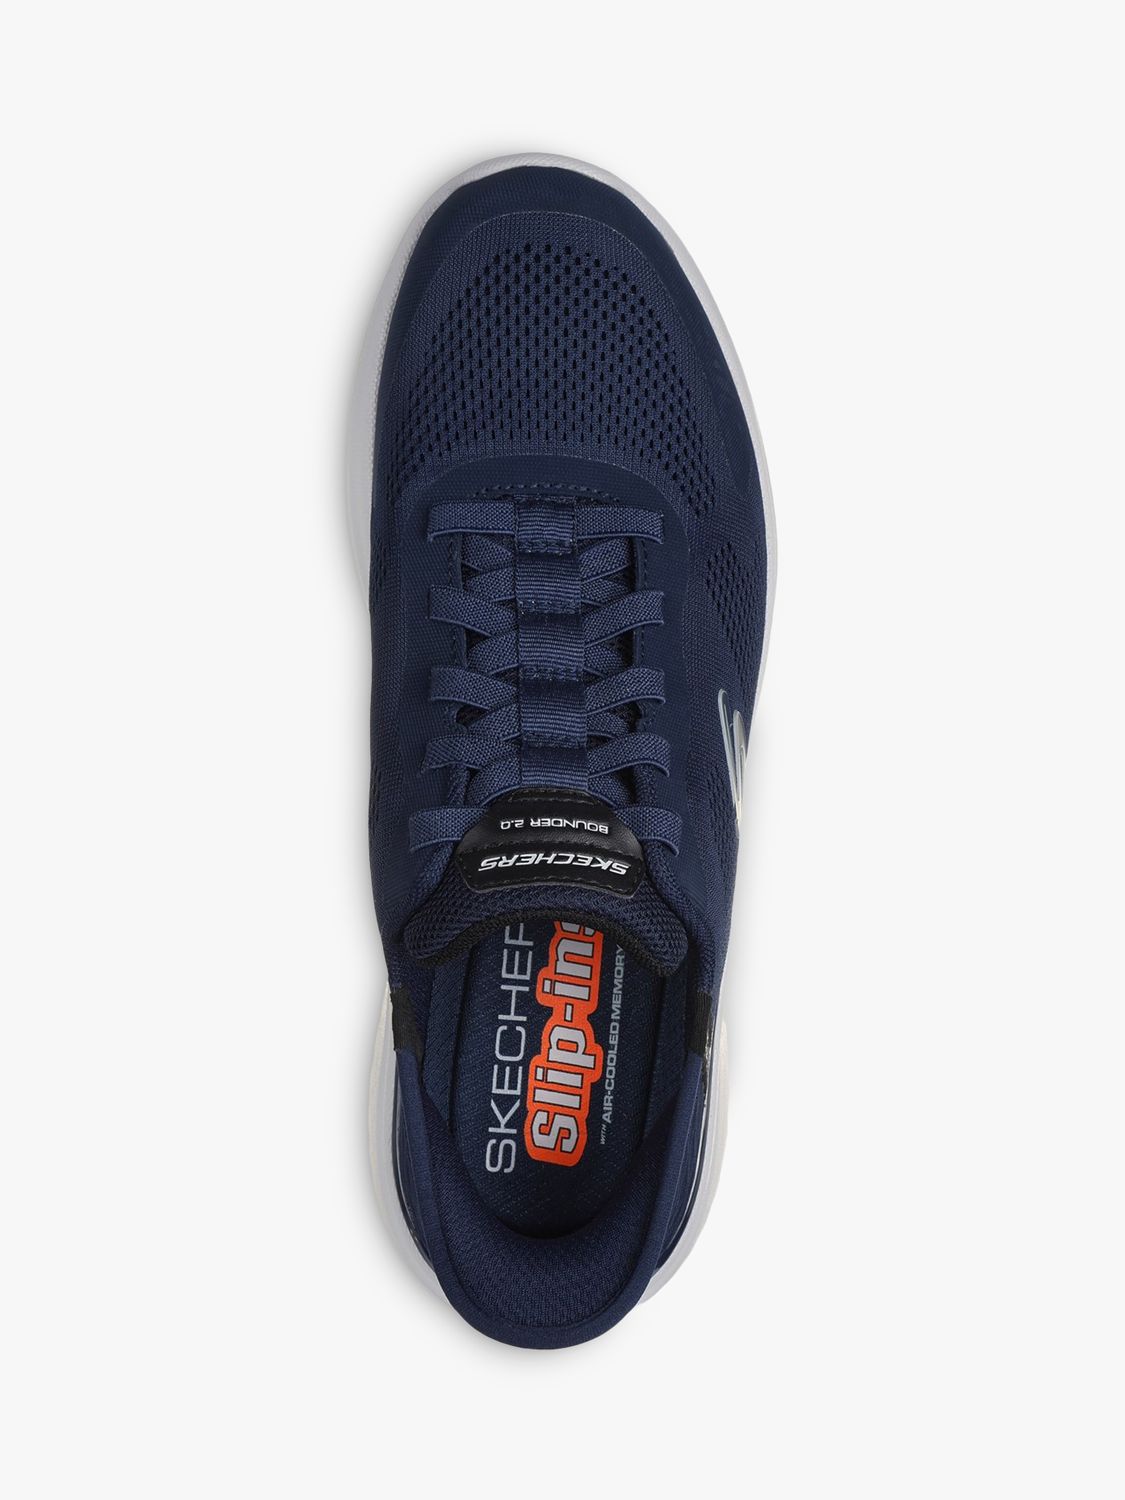 Skechers Bounder 2.0 Emerged Trainers, Navy, 6